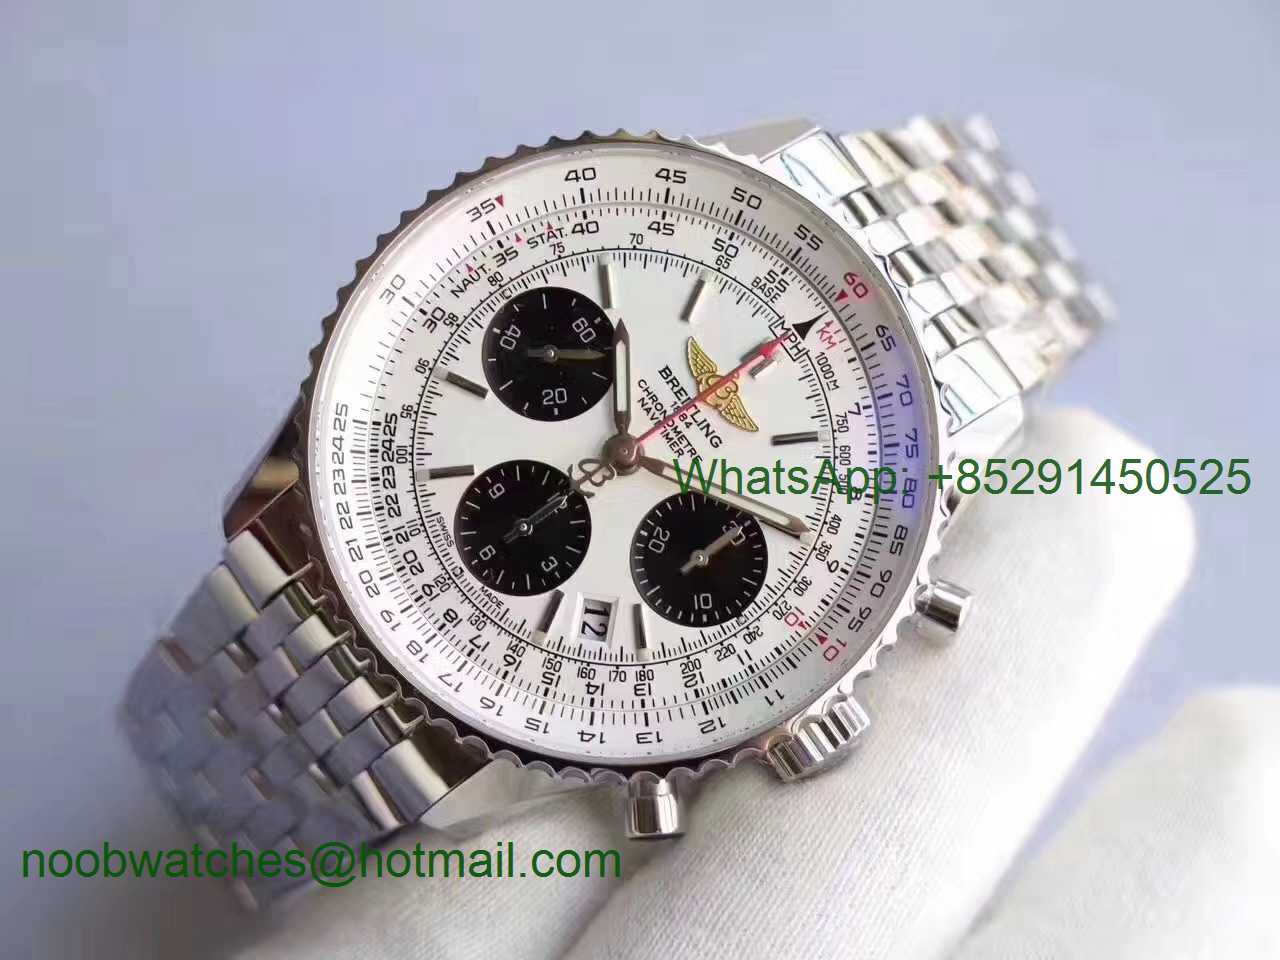 Replica Breitling Navitimer 01 SS JF 1:1 Best Edition WHITE Dial on SS Bracelet A7750